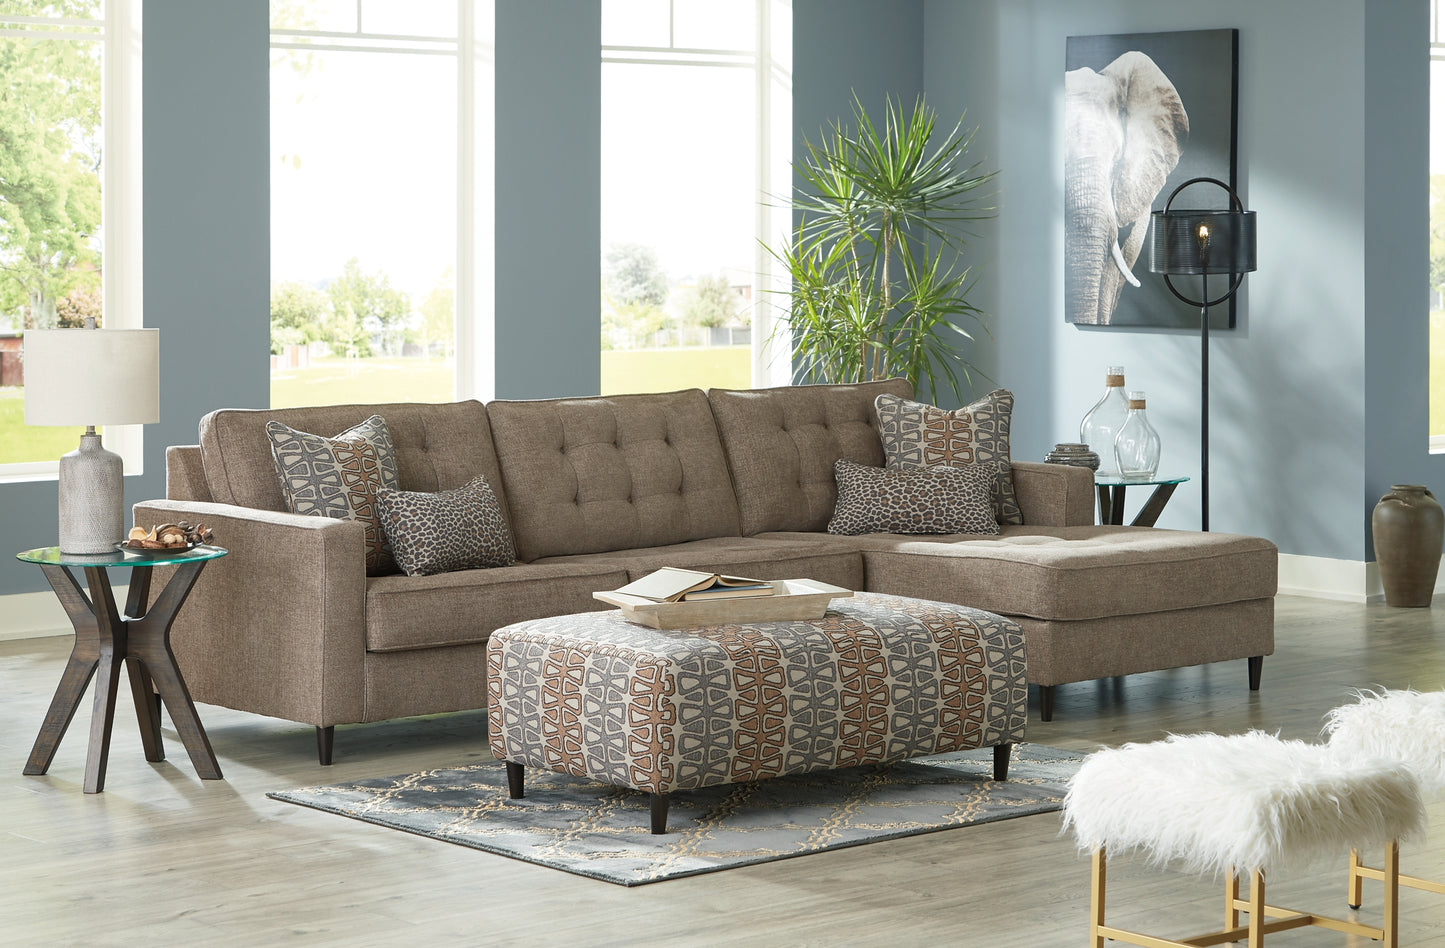 Flintshire 2-Piece Sectional with Ottoman JB's Furniture  Home Furniture, Home Decor, Furniture Store